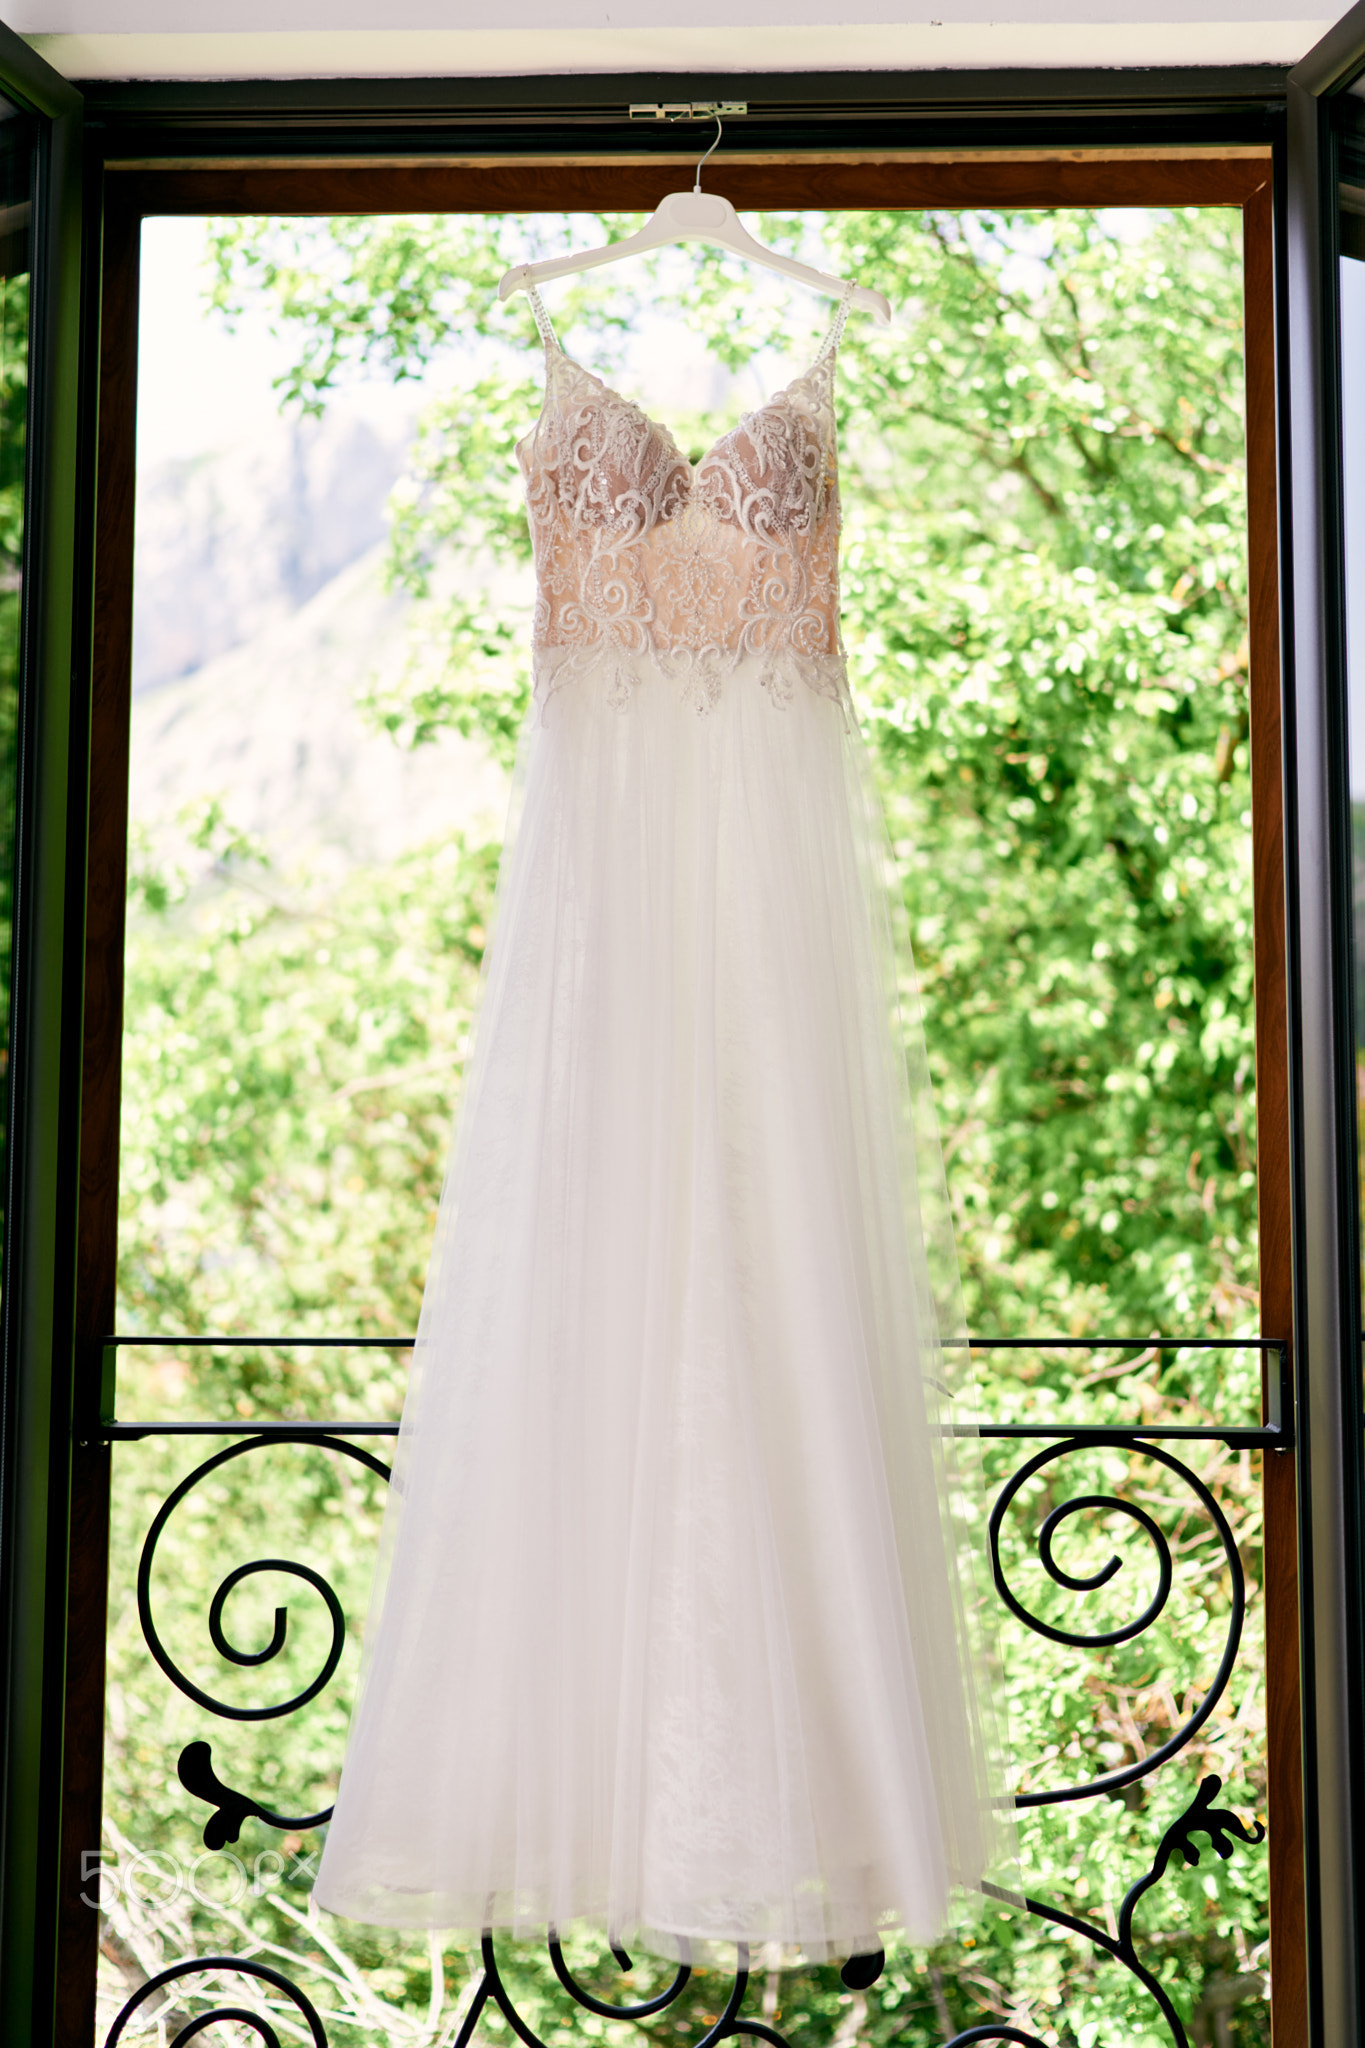 Lace wedding dress hangs on a hanger on the balcony against the